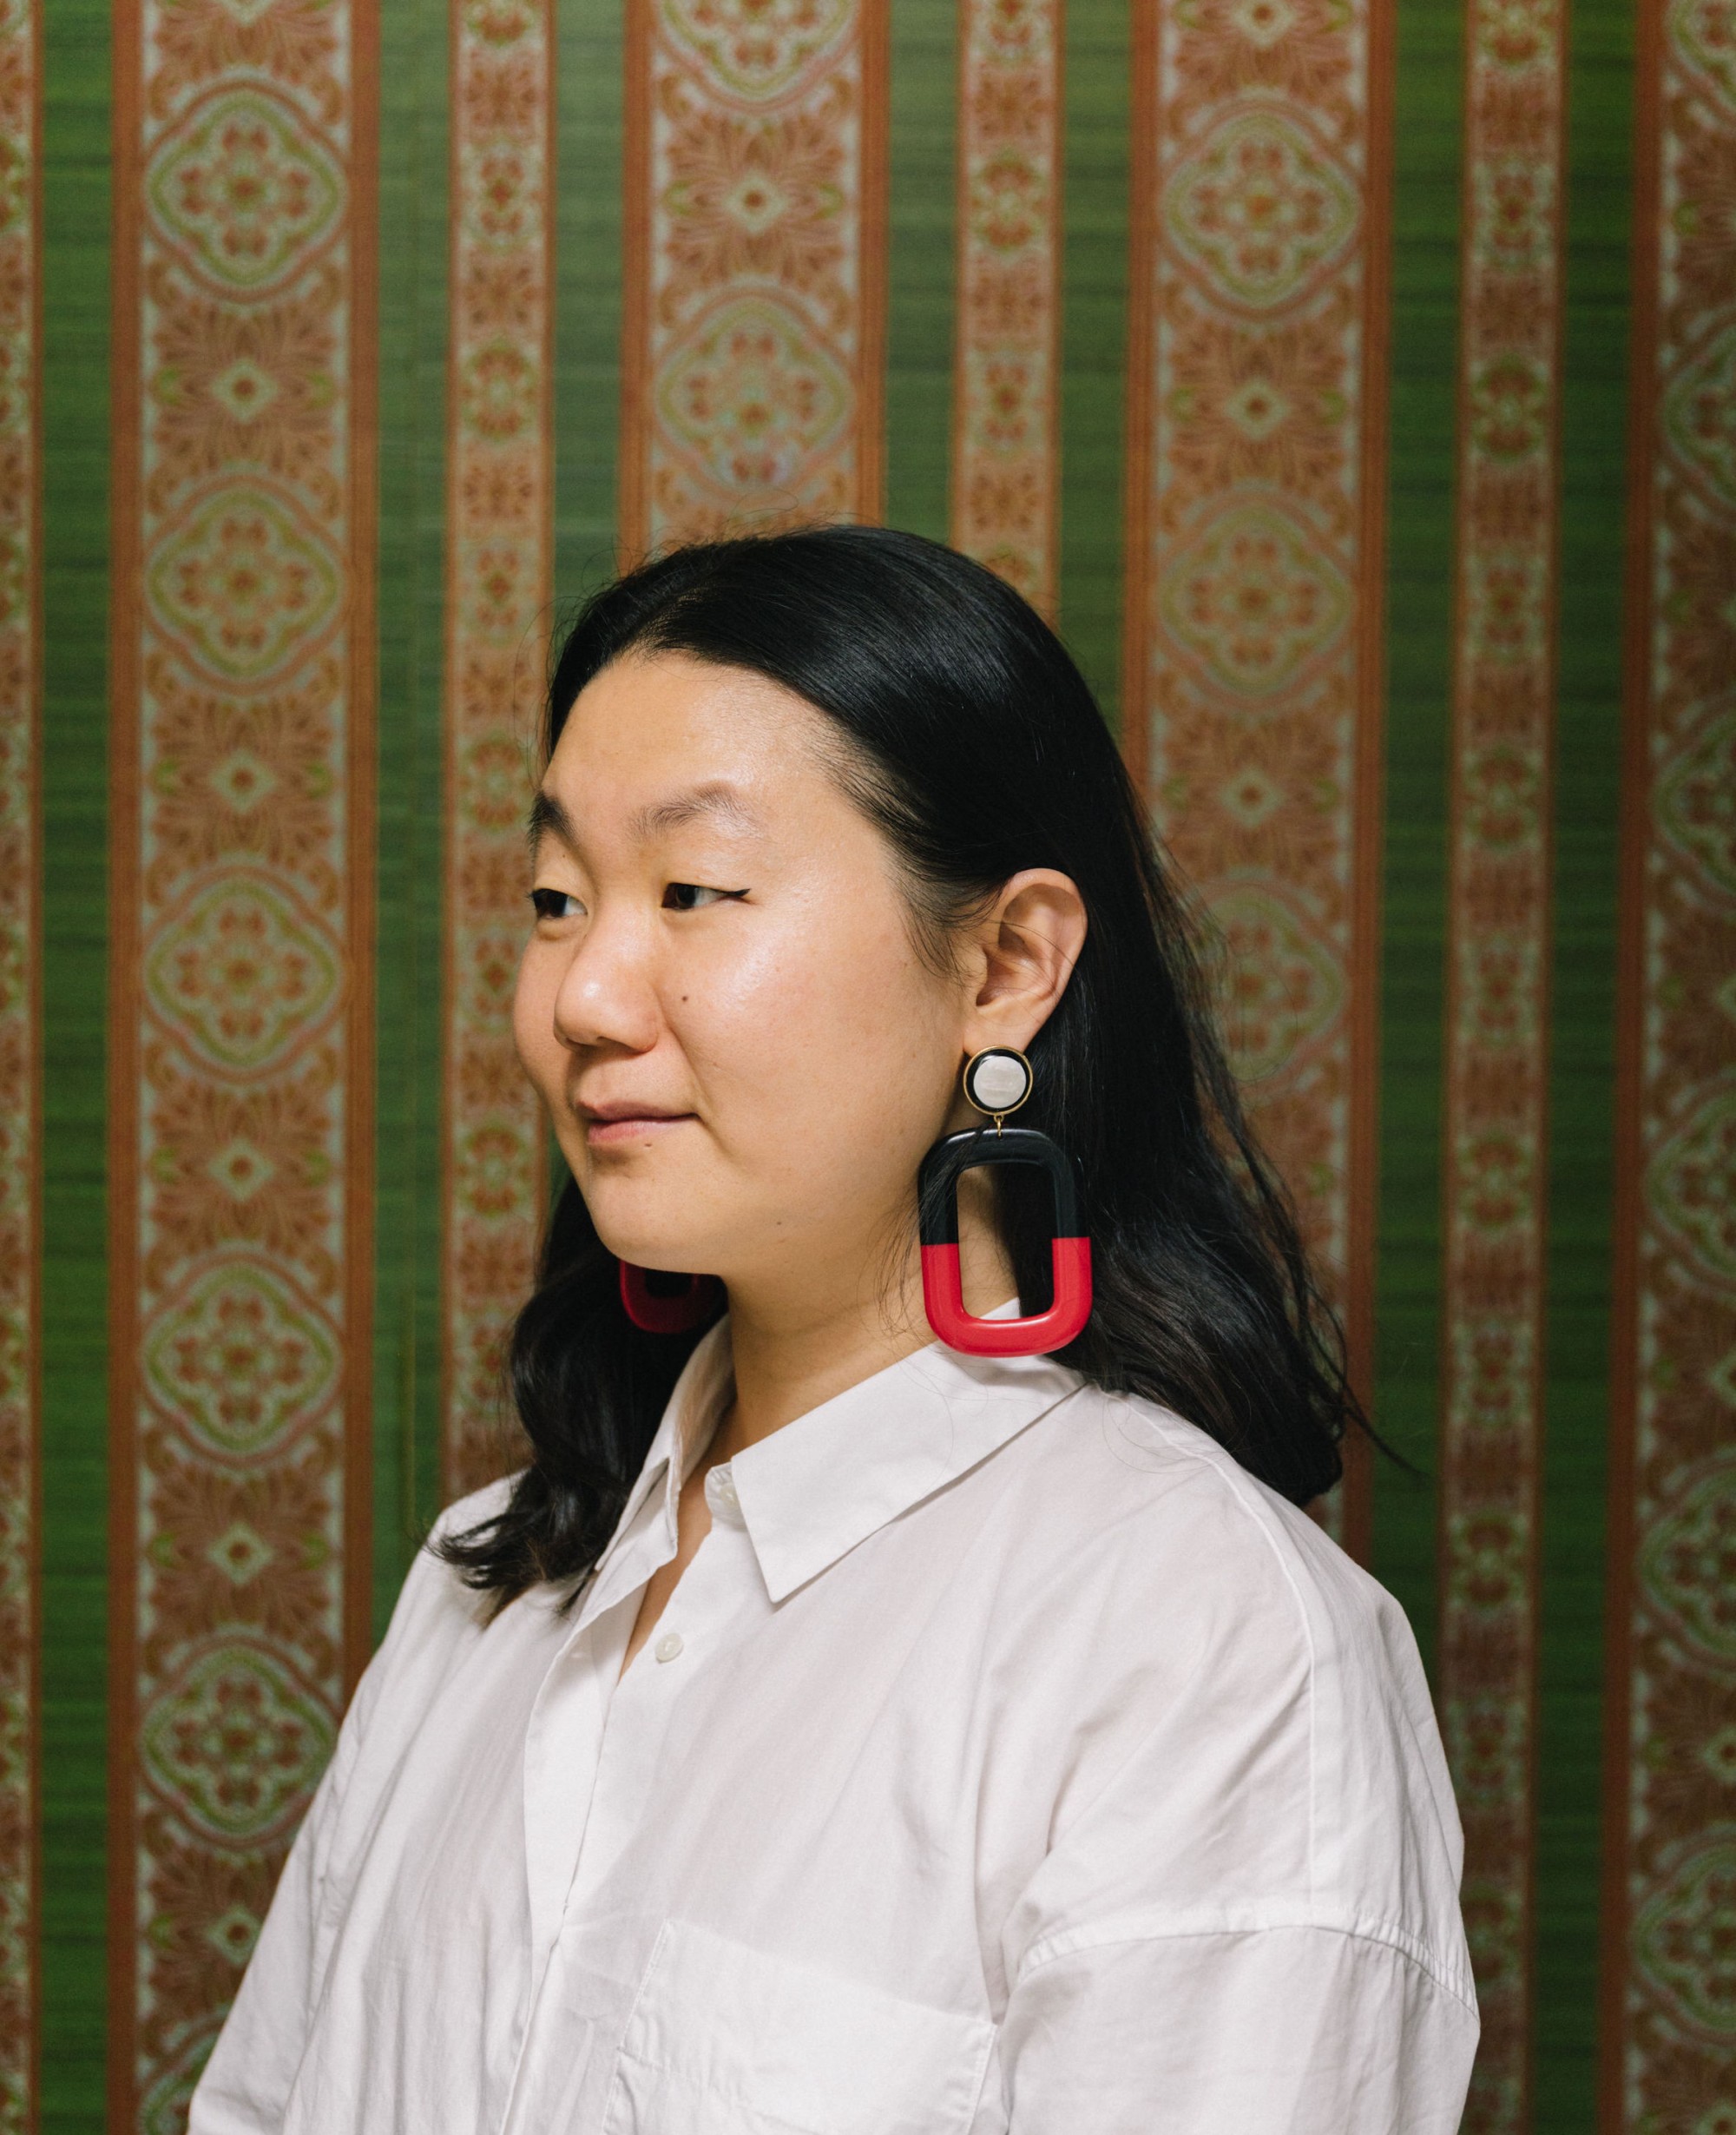 Wendy Xu stands in front of green and orange vertical striped wallpaper, wearing a white shirt and large red and black earrings, looking to the side.